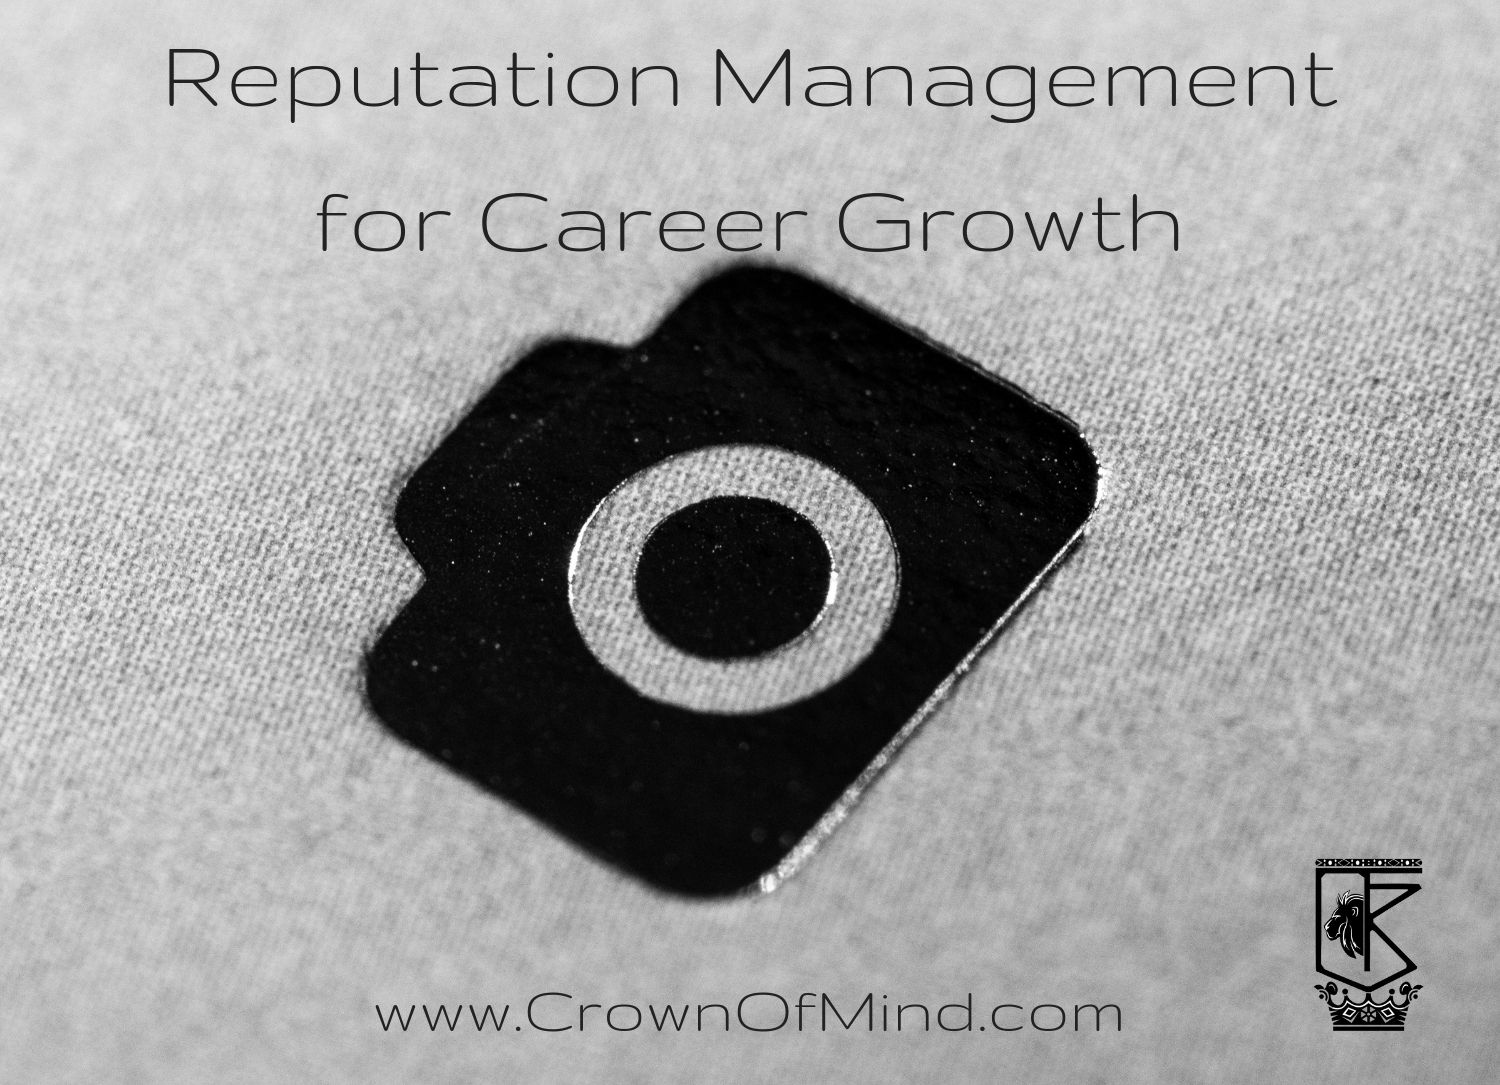 Reputation Management for Career Growth